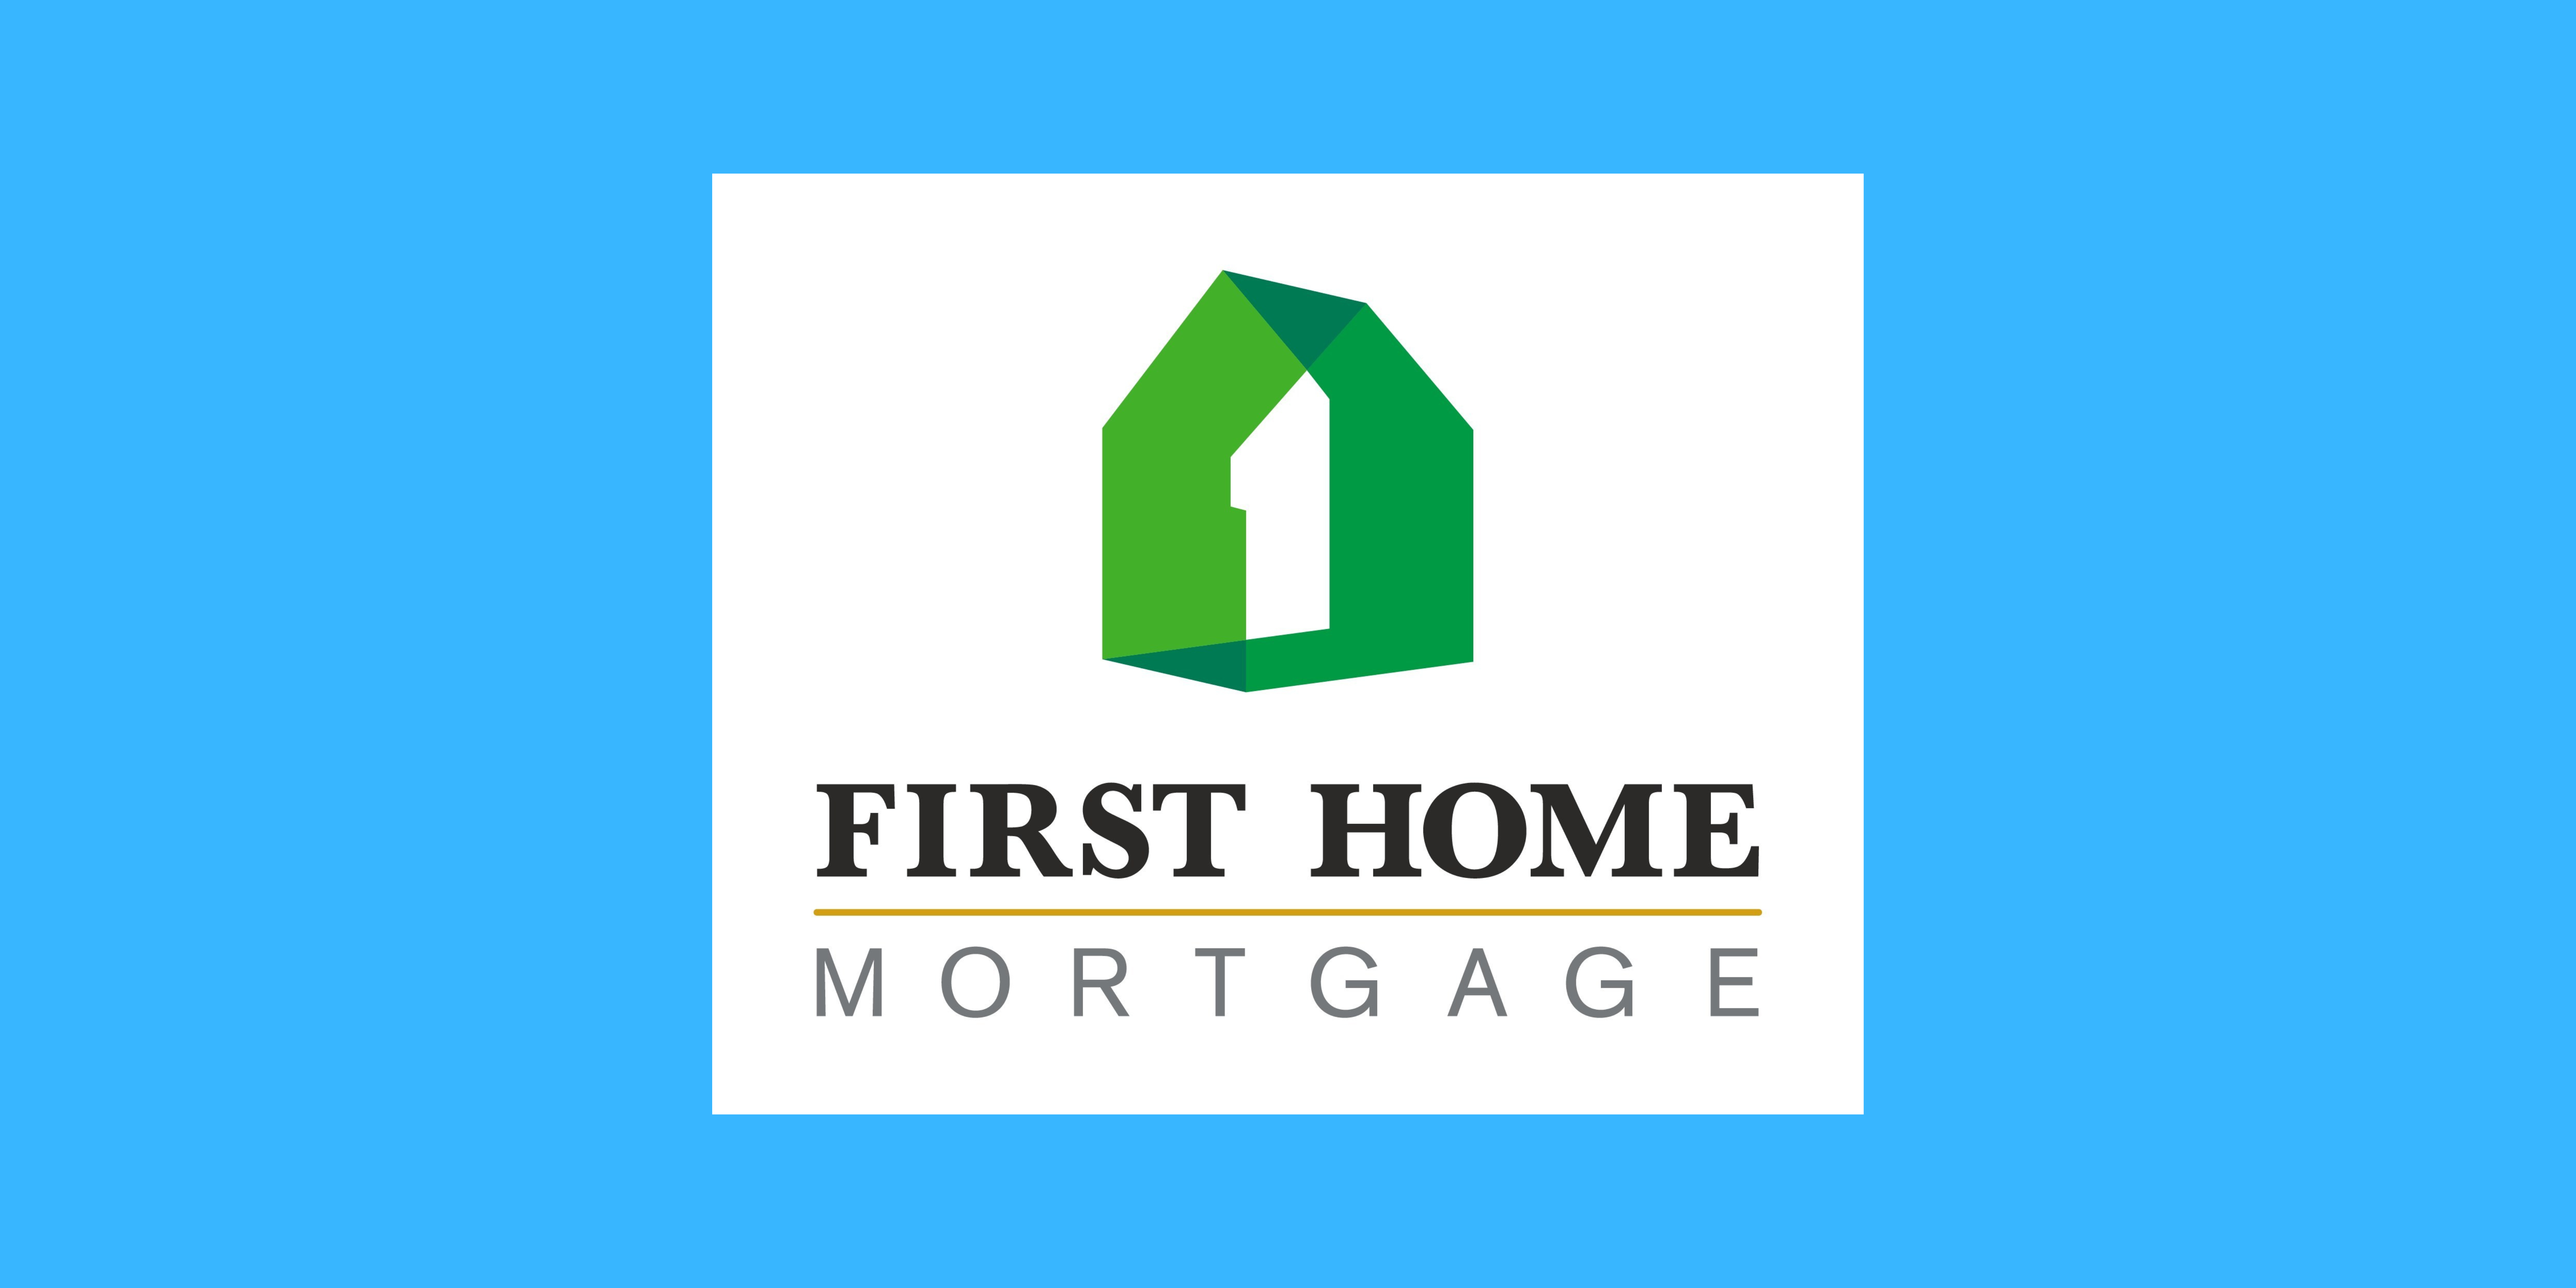 First Home Mortgage Launches New Program For First-Time Homebuyers